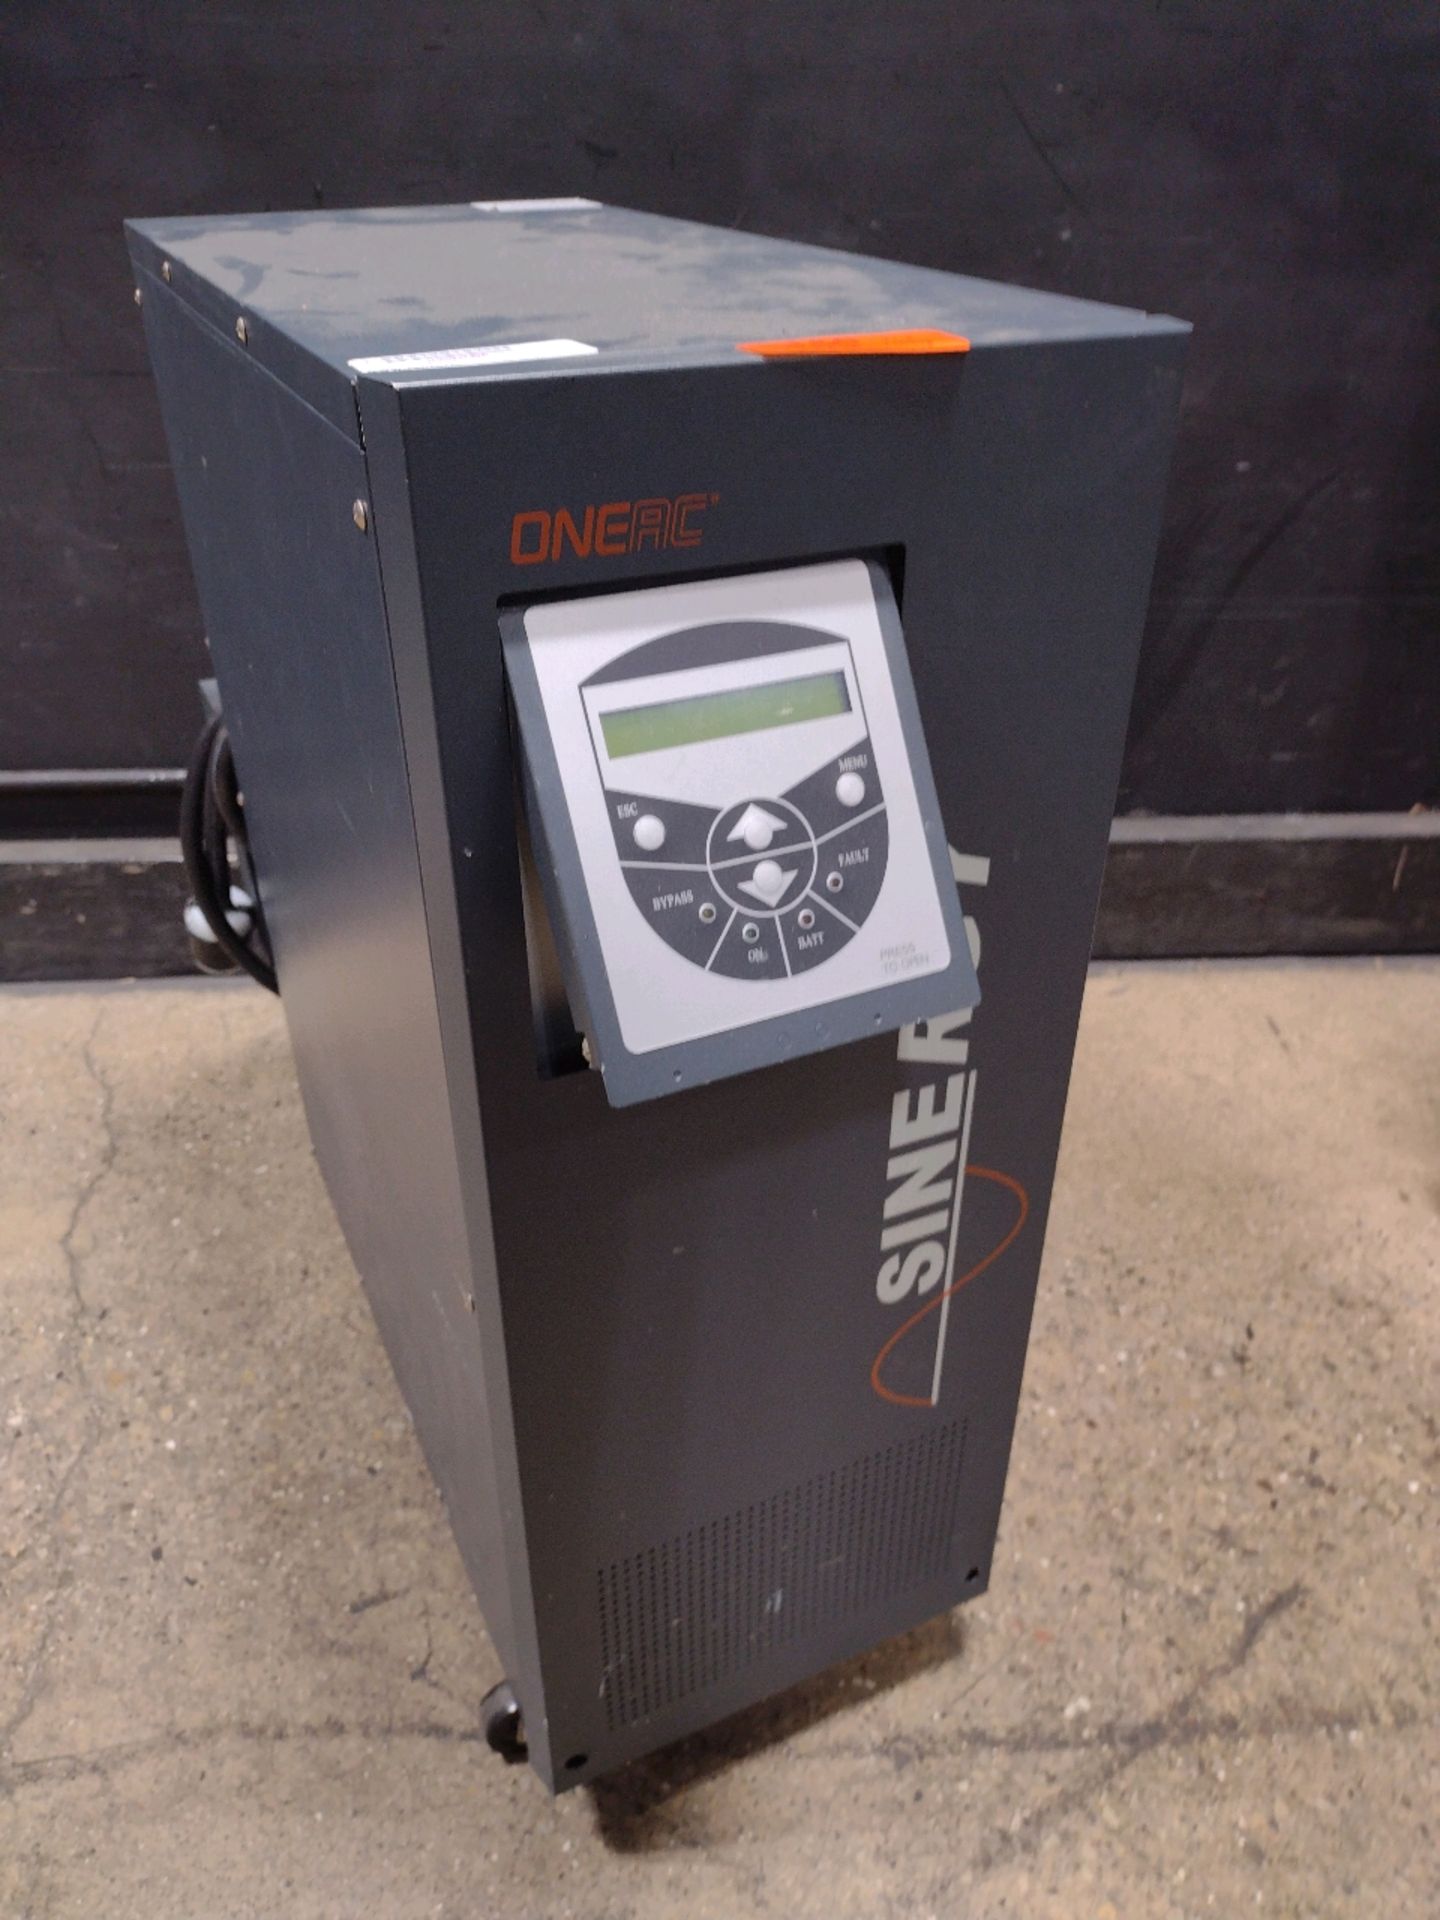 ONE AC SINERGY II UPS (LOCATED AT 3325 MOUNT PROSPECT ROAD, FRANKLIN PARK, IL, 60131)